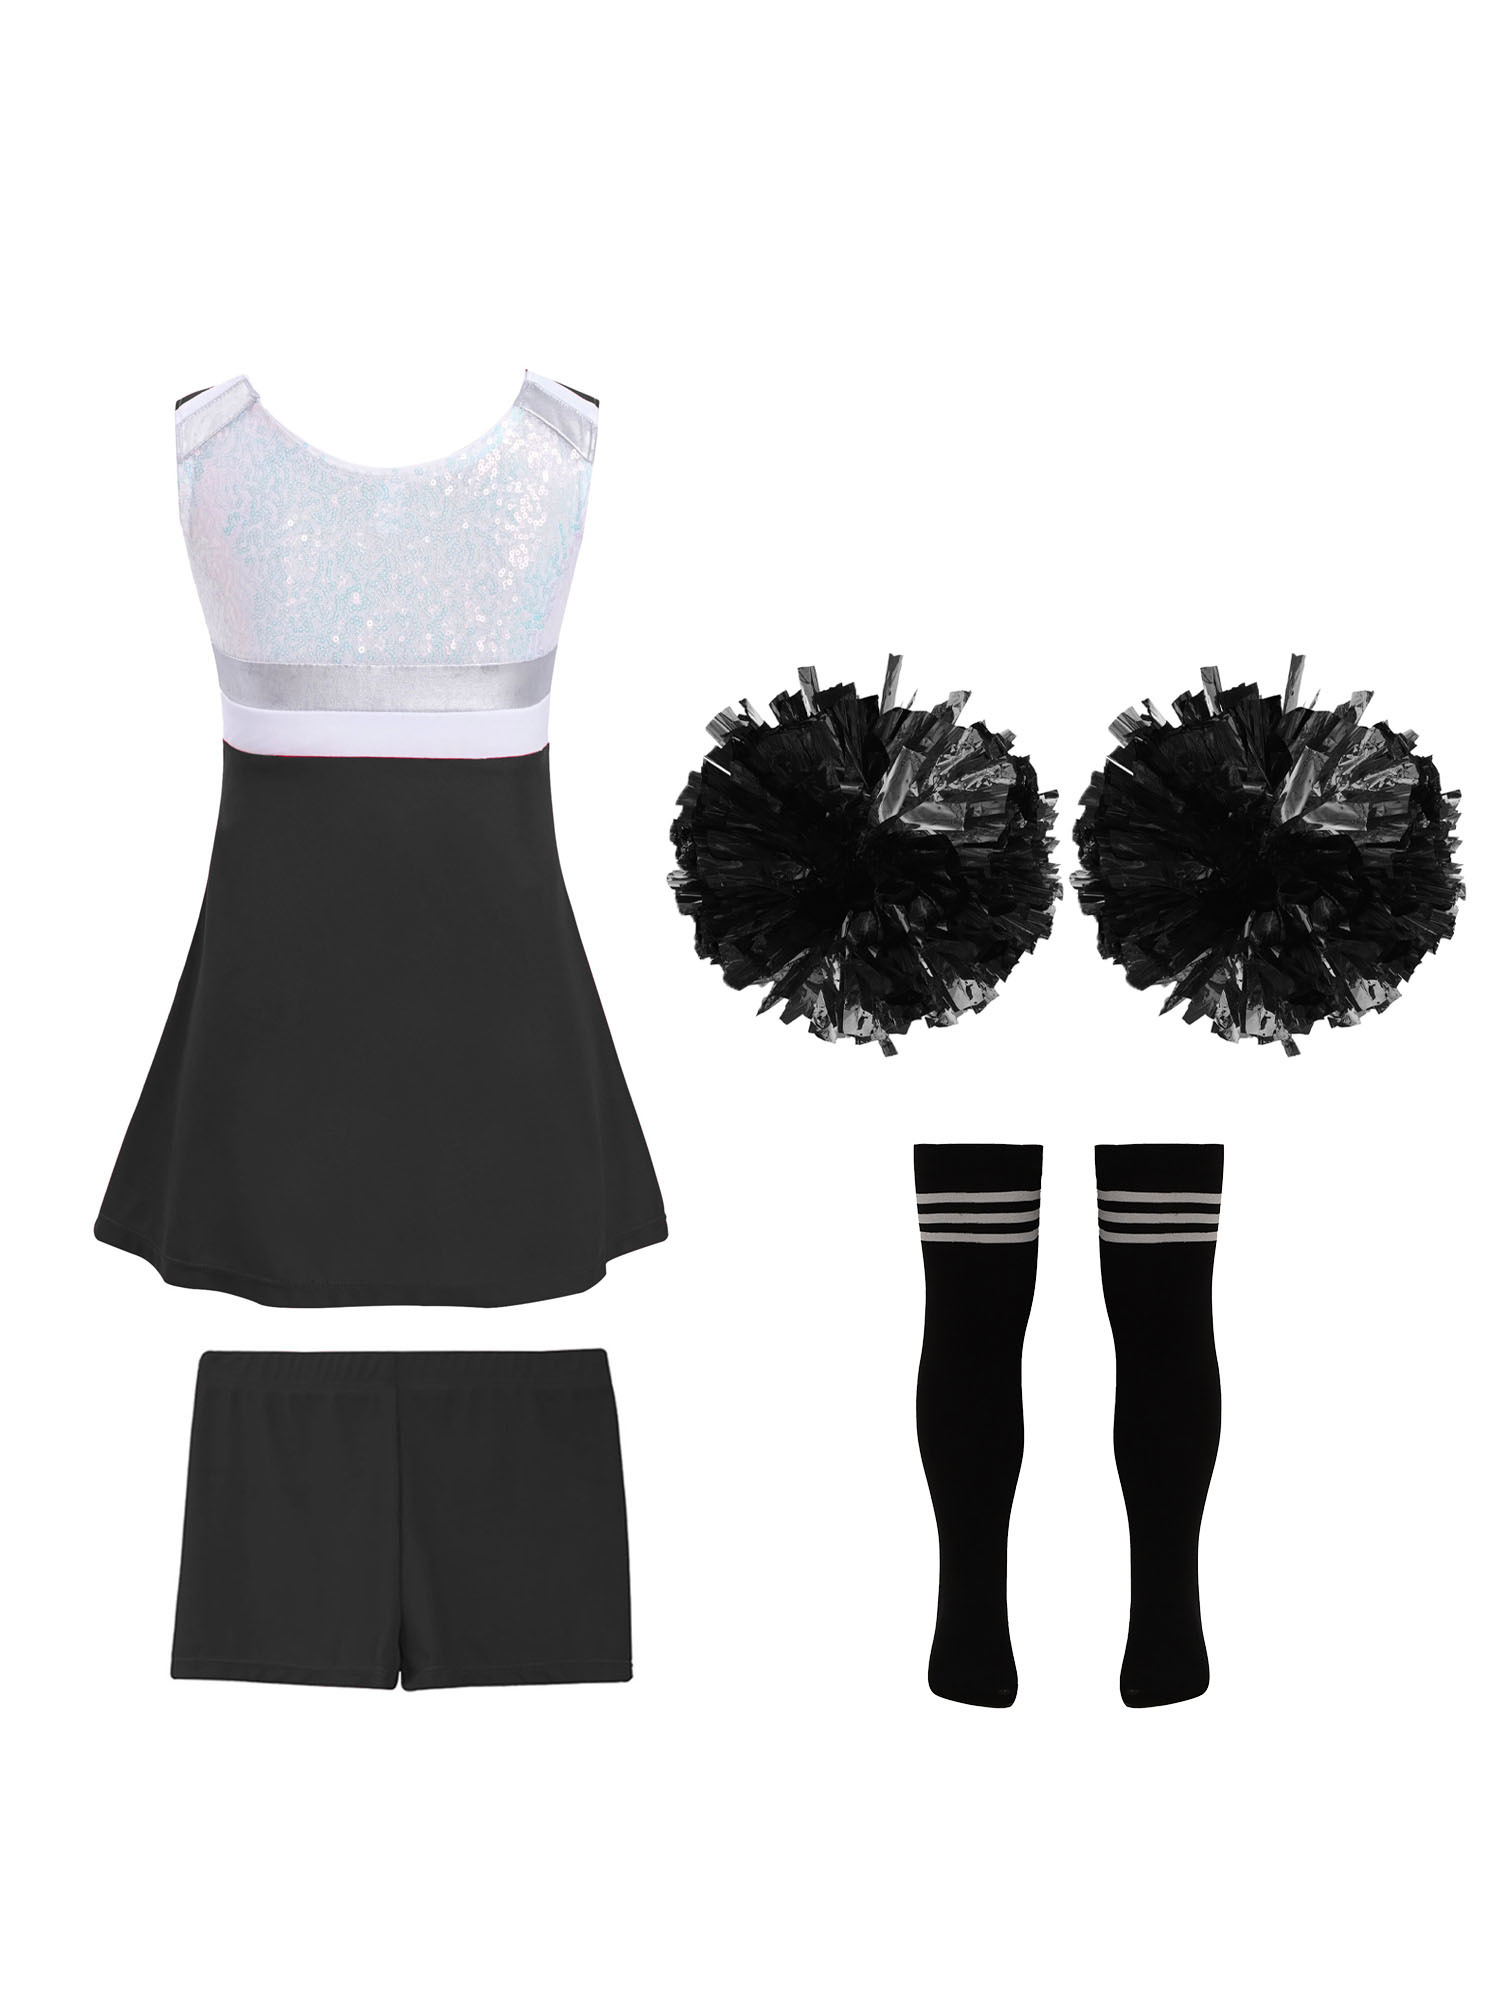 TiaoBug Kids Girls Cheer Leader Uniform Sports Games Cheerleading Dance Outfits Halloween Carnival Fancy Dress Up A Black&White-A 14 - image 2 of 5